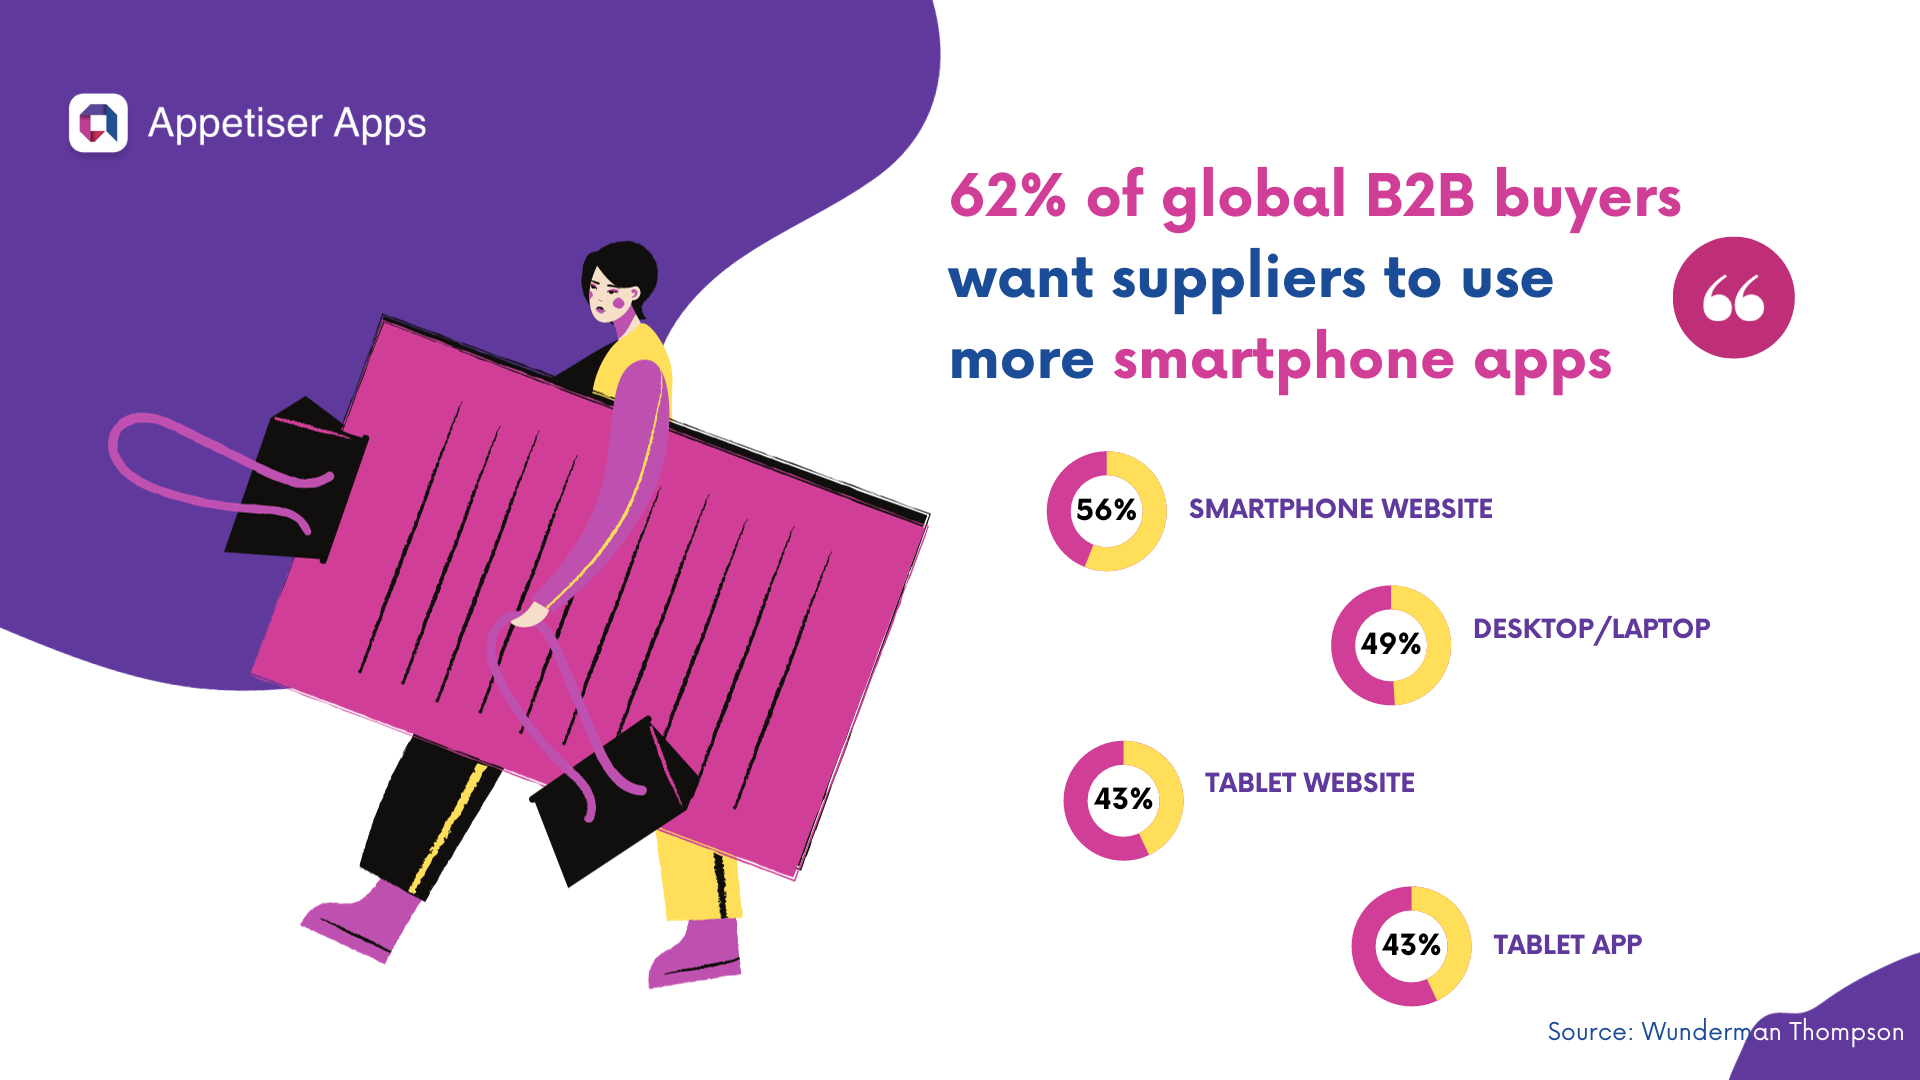 BETS: B2B ecommerce trends and statistics on B2B preference on smartphones